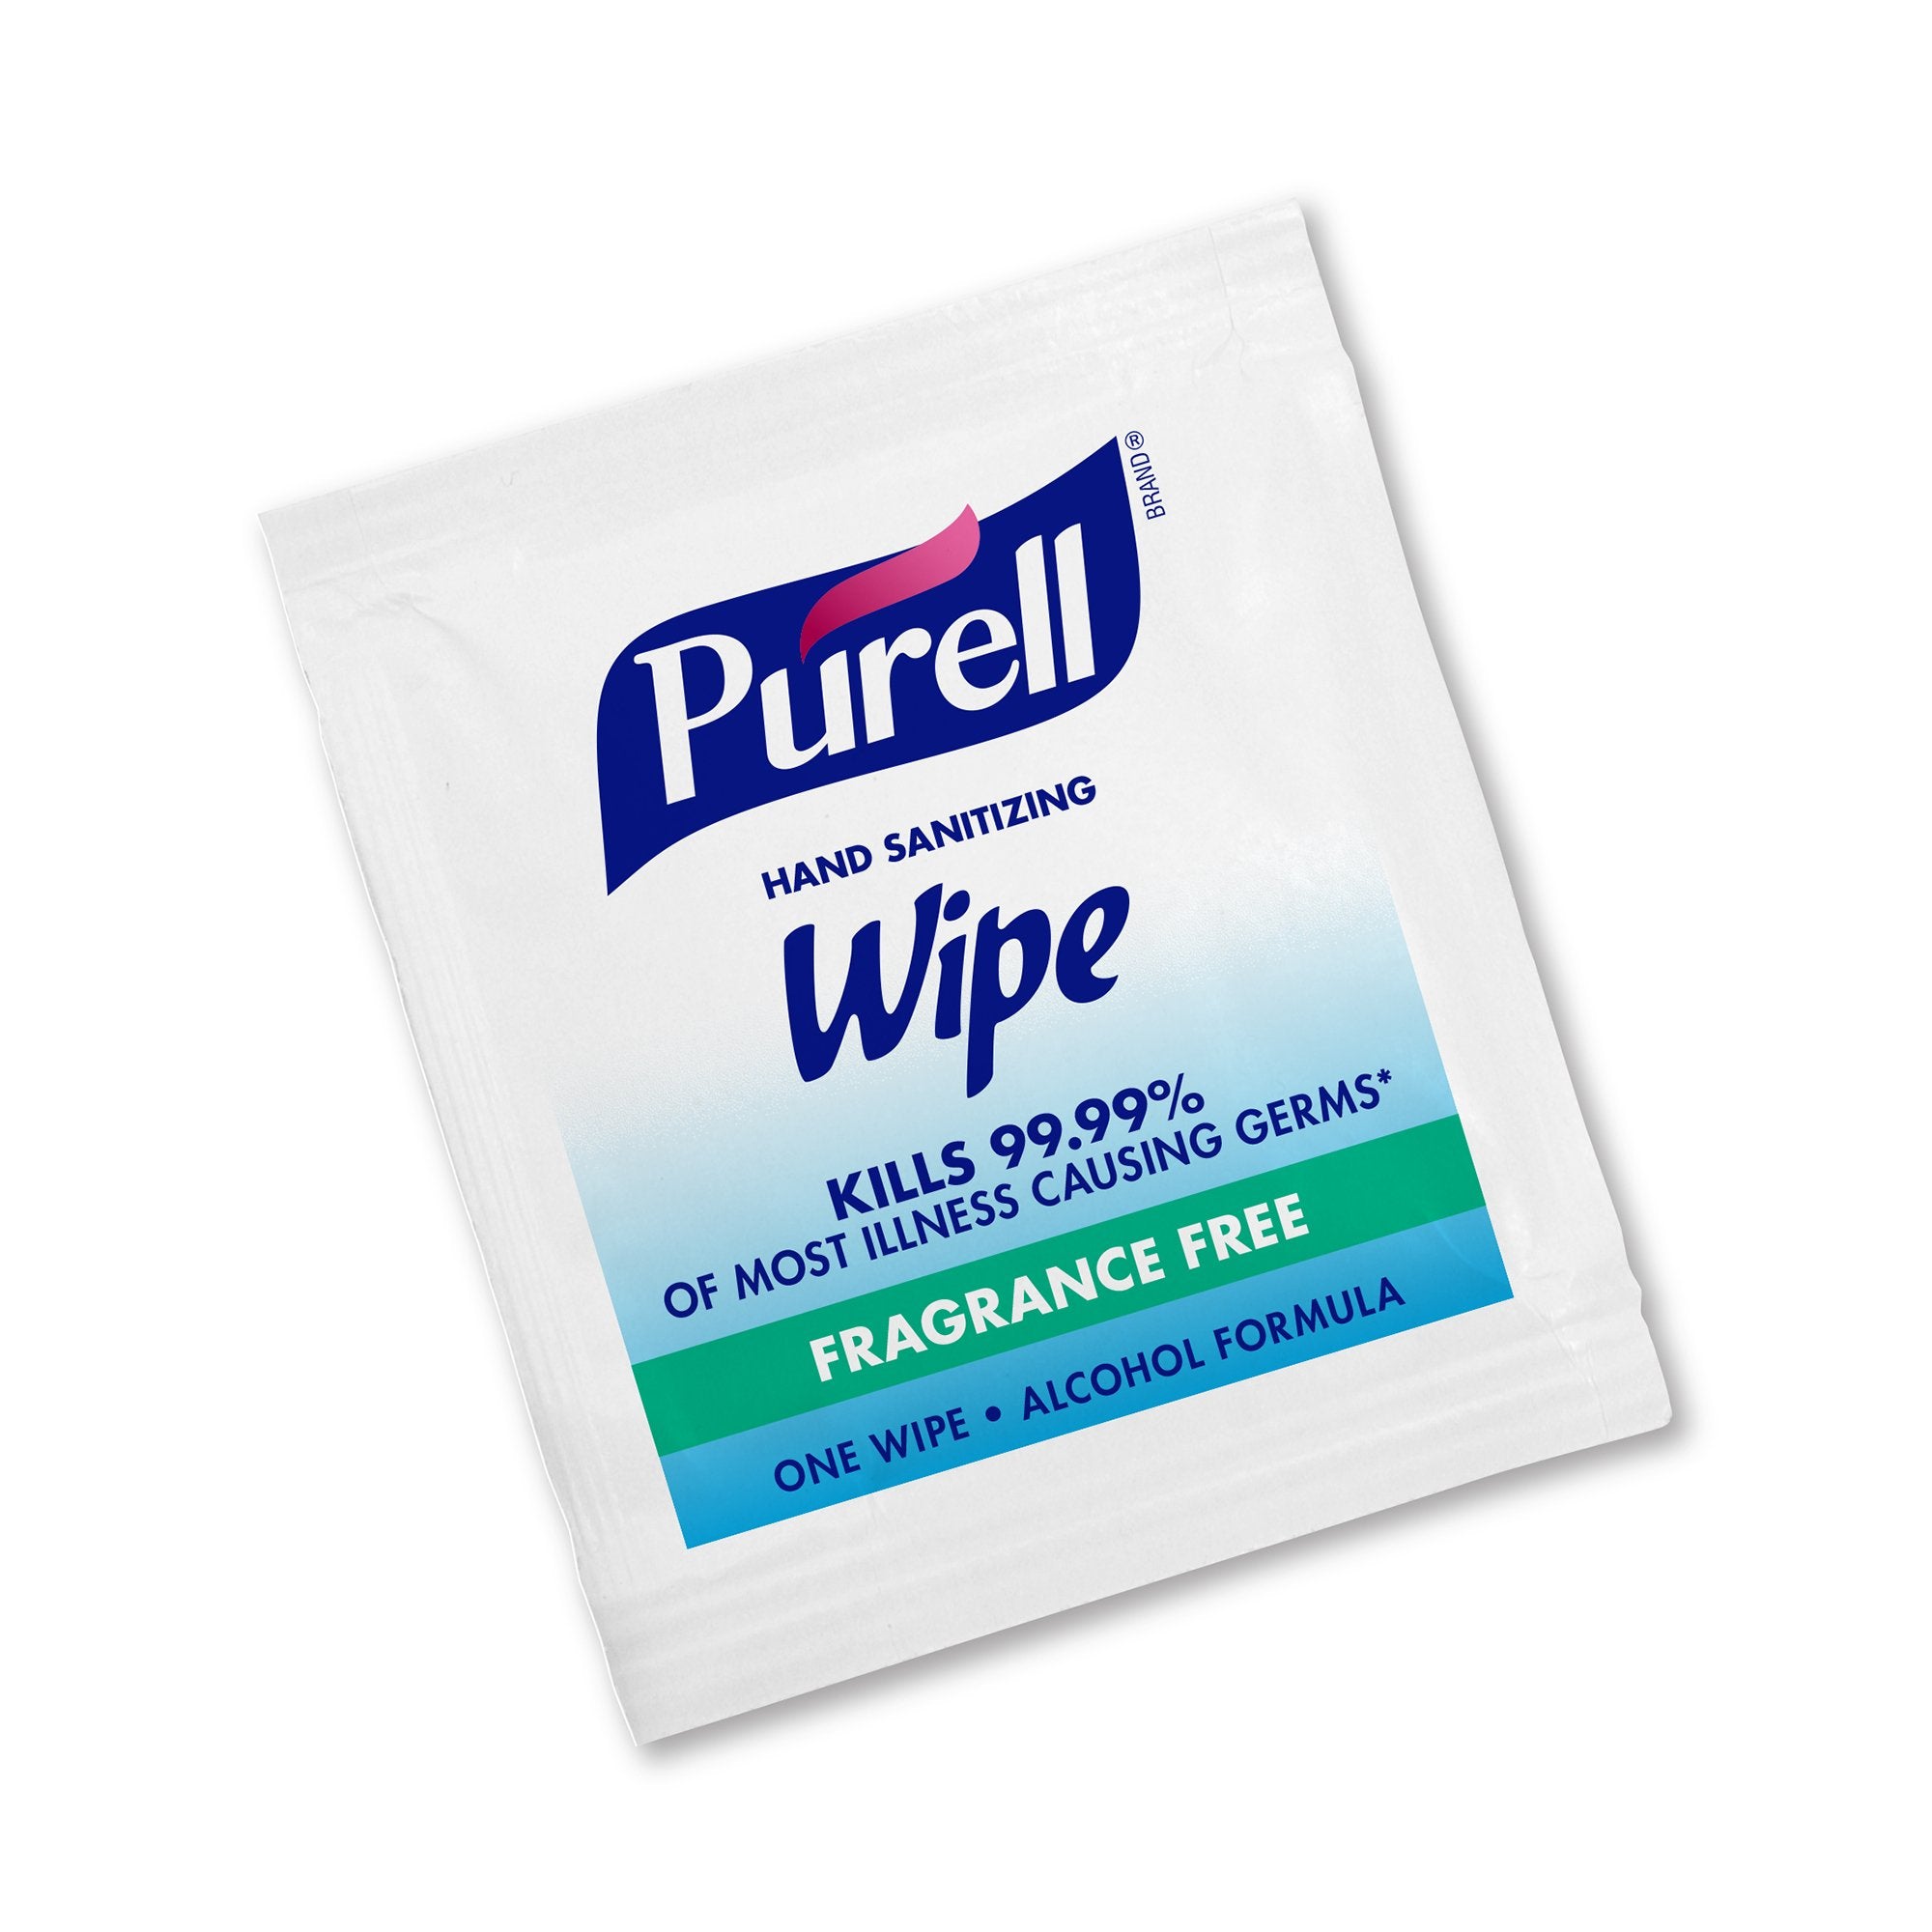 Hand Sanitizing Wipe Purell 100 Count Ethyl Alcohol Wipe Individual Packet